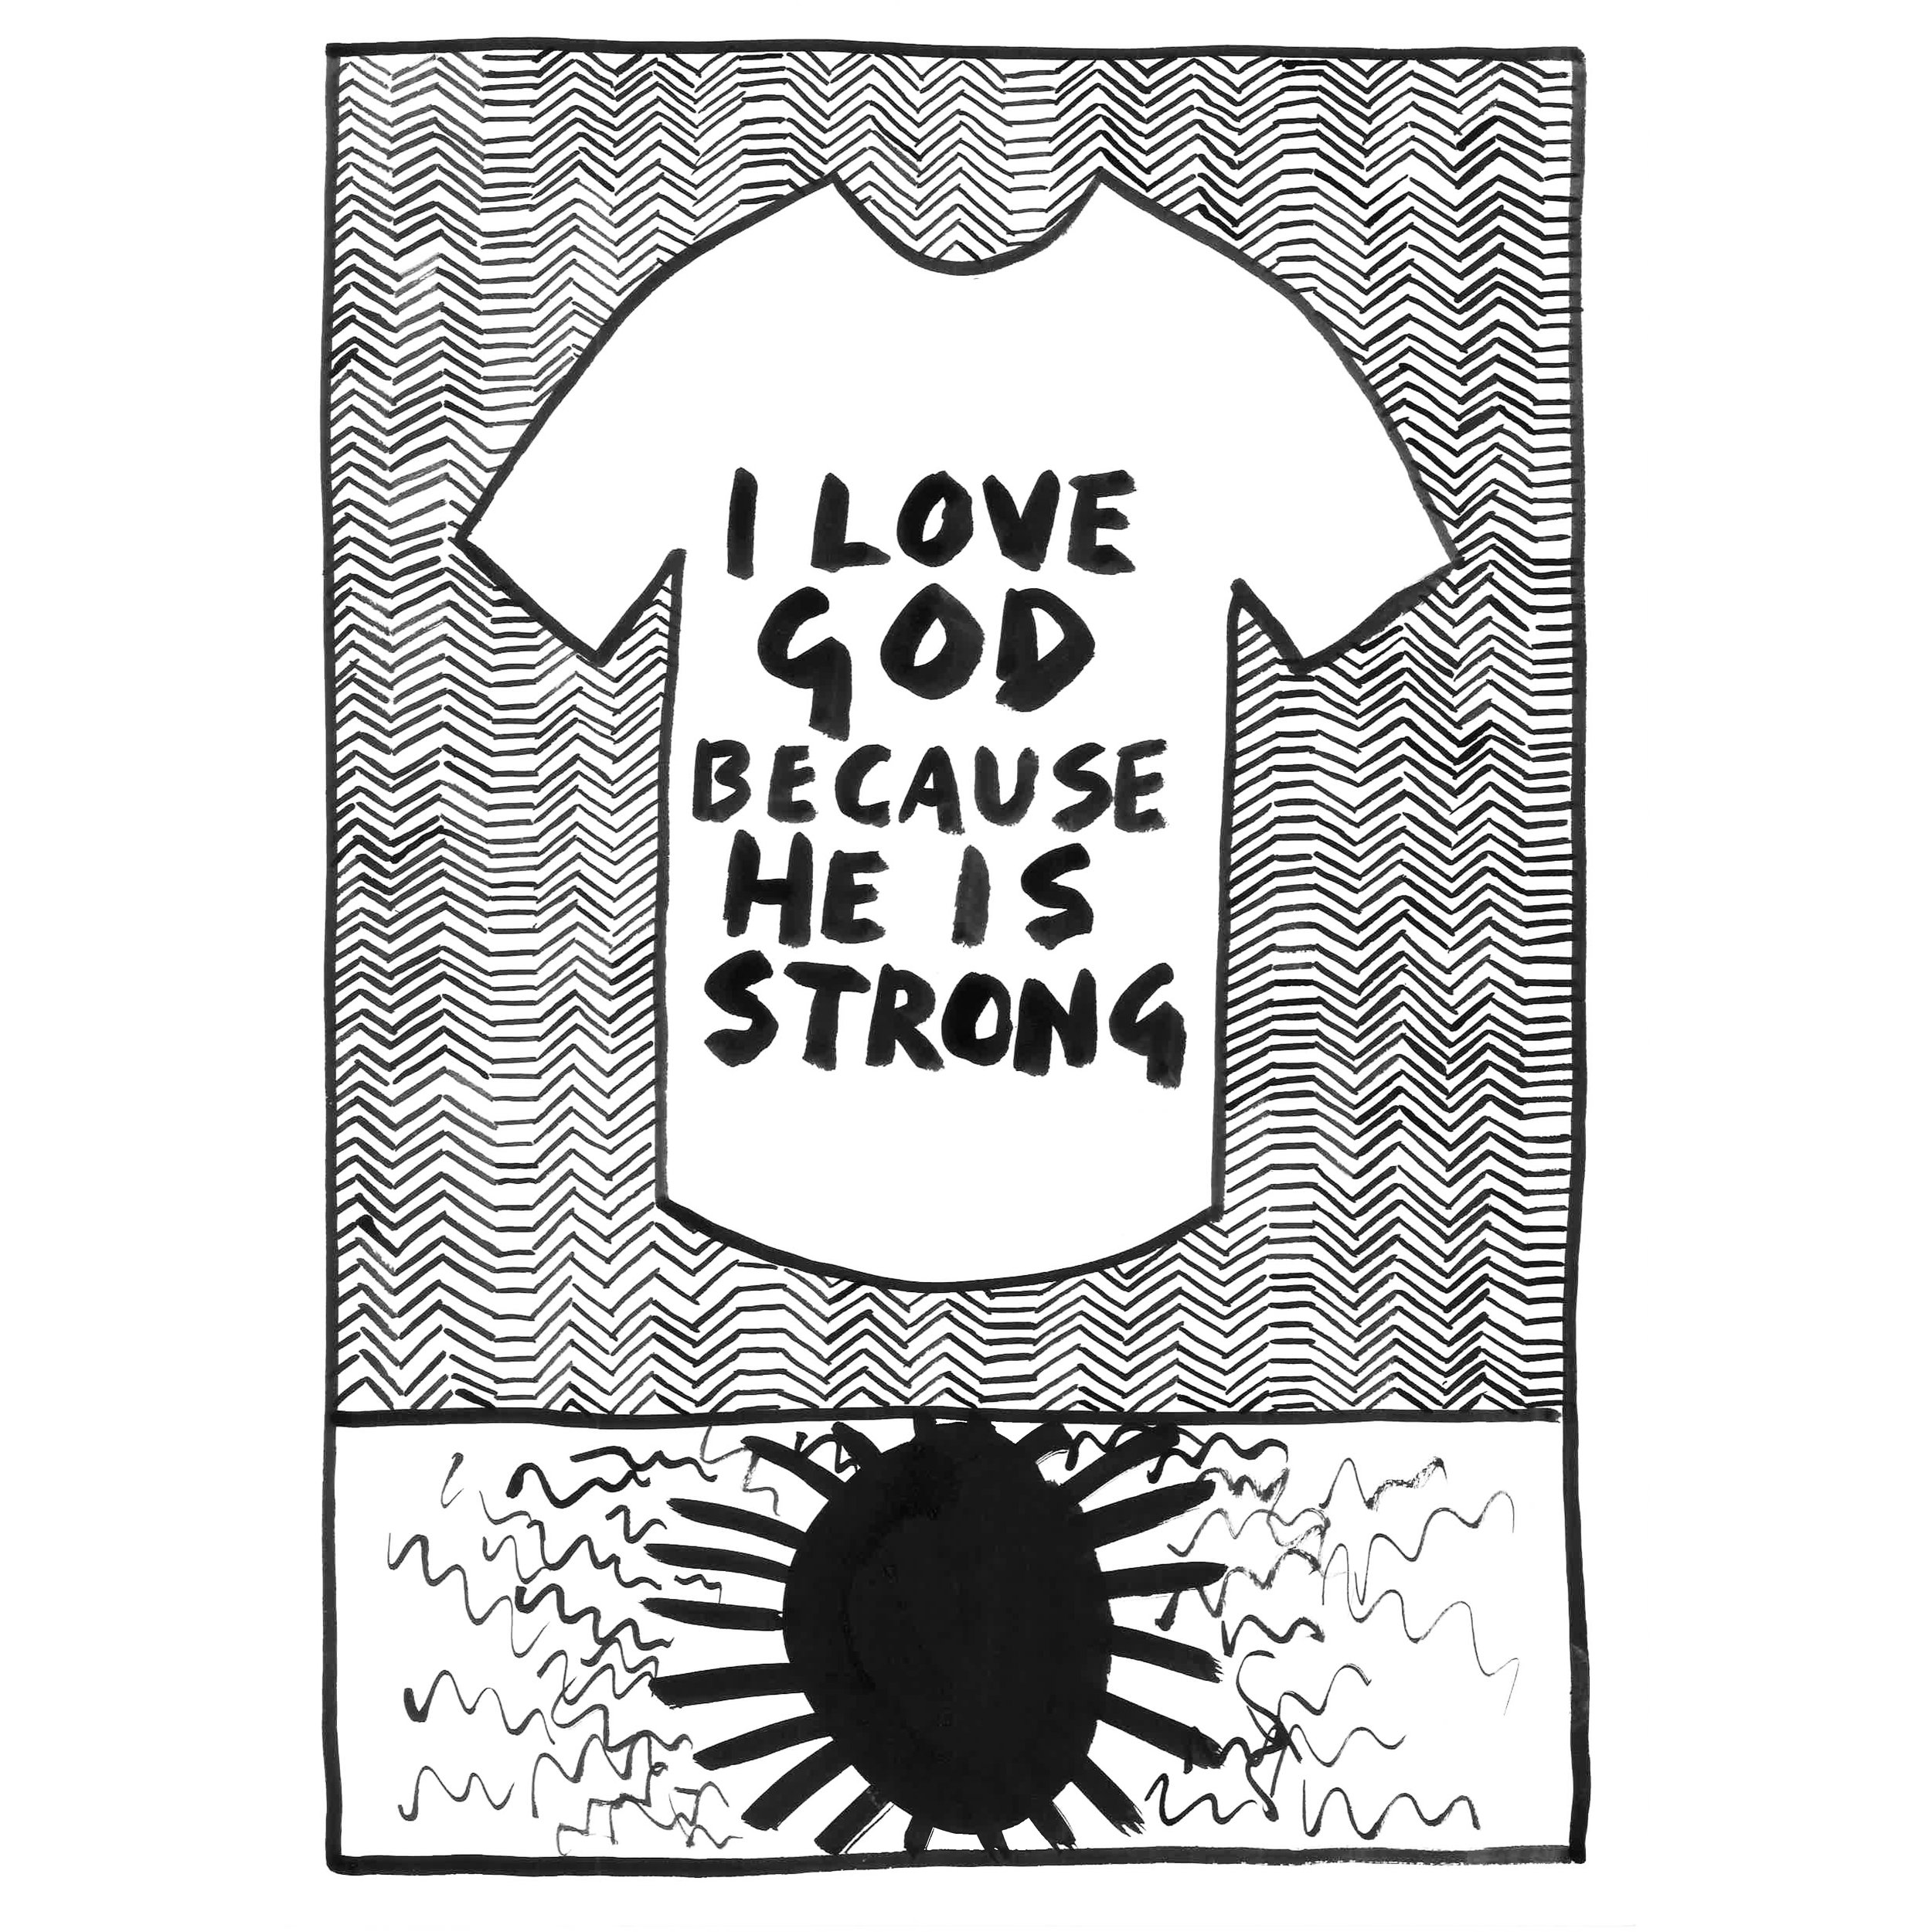 I Love God Because He Is Strong.jpg